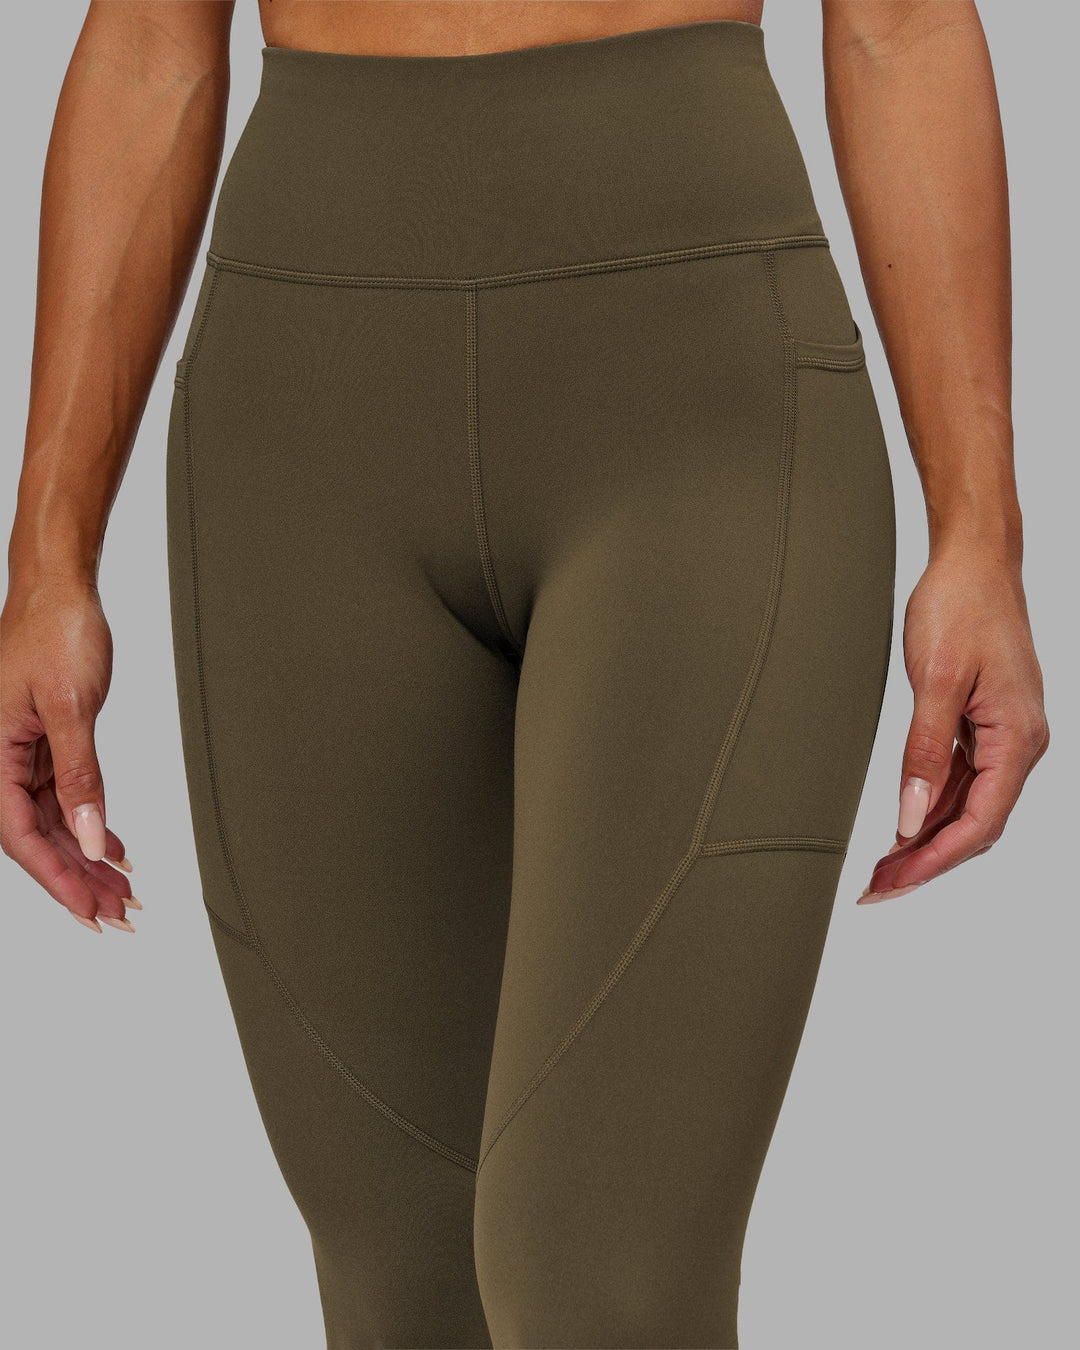 Rep Full Length Tights - Army Green